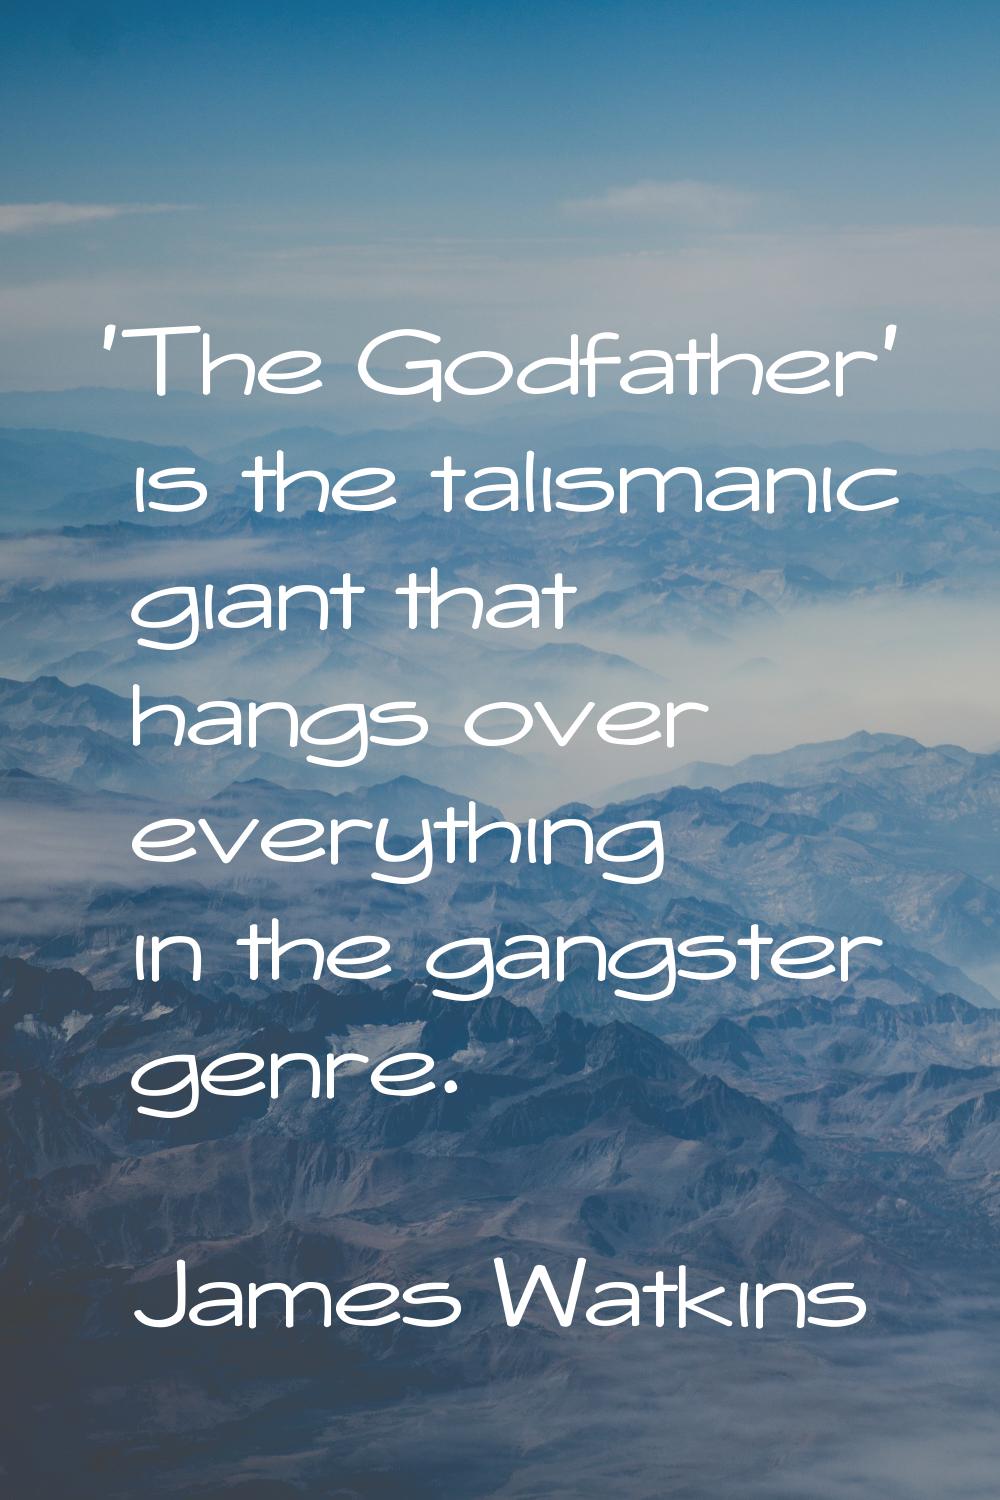 'The Godfather' is the talismanic giant that hangs over everything in the gangster genre.